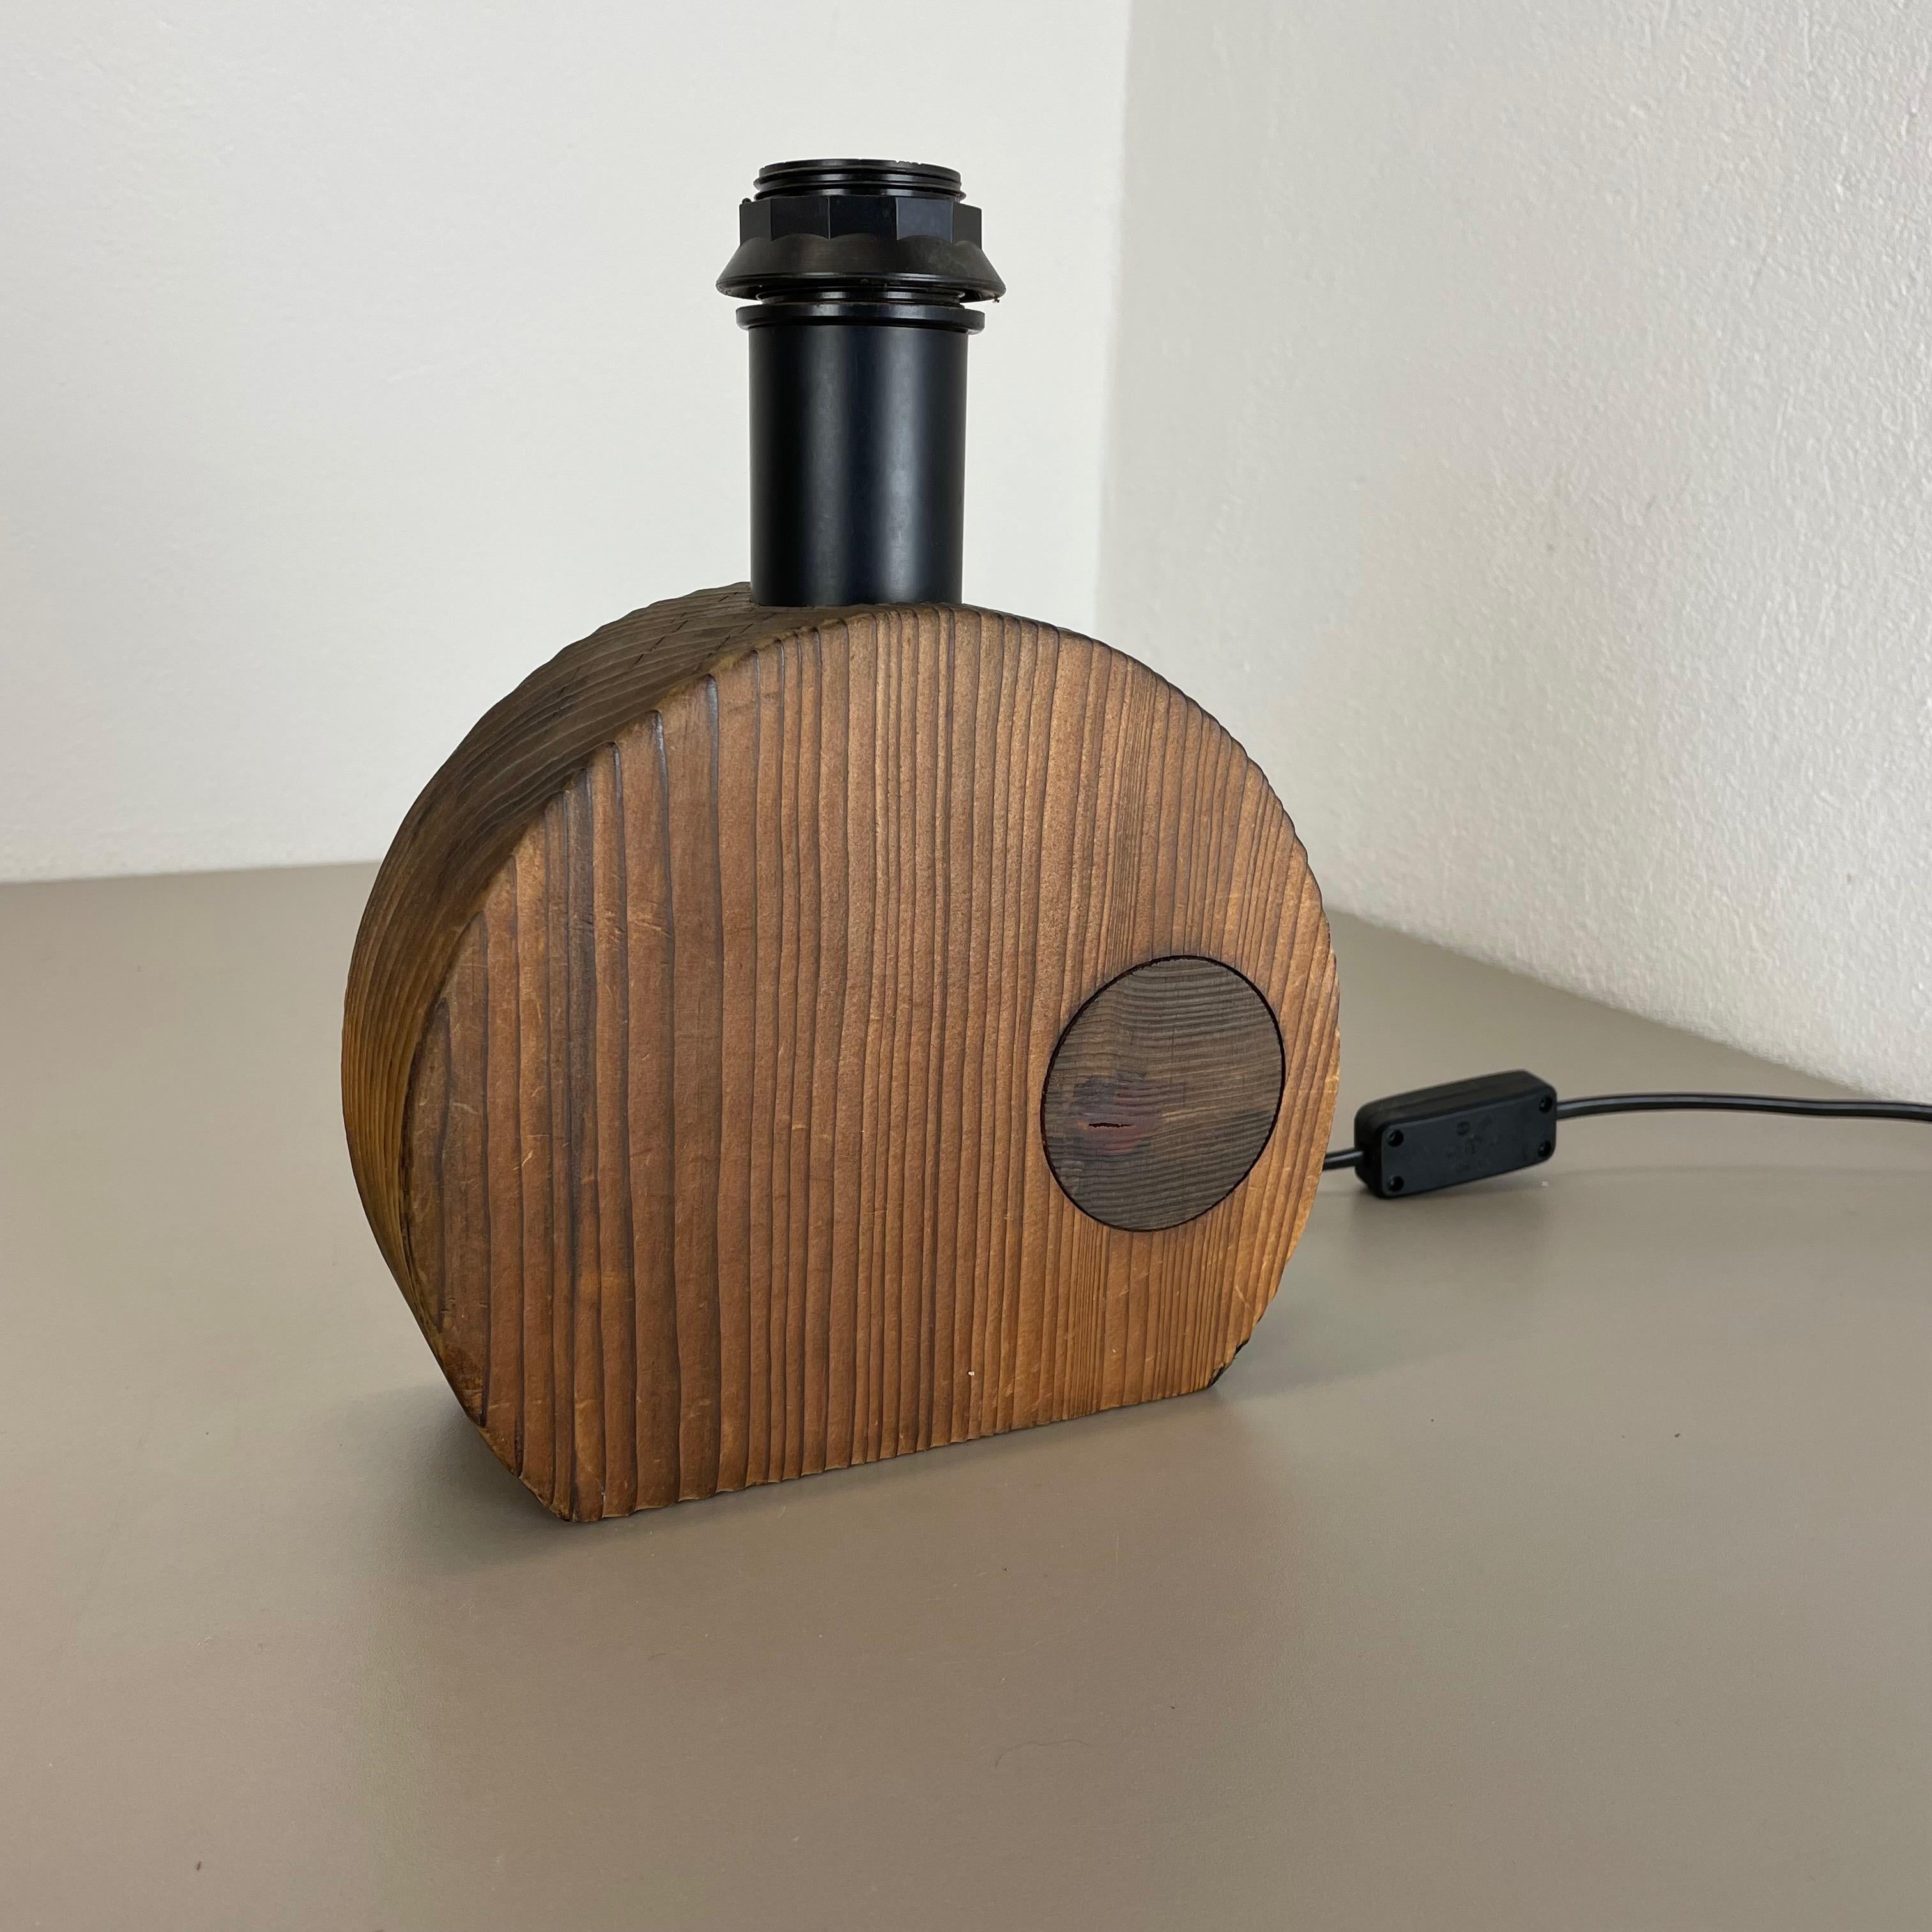 20th Century Organic Sculptural Wooden Table Light Made Temde Lights, Germany, 1970s For Sale